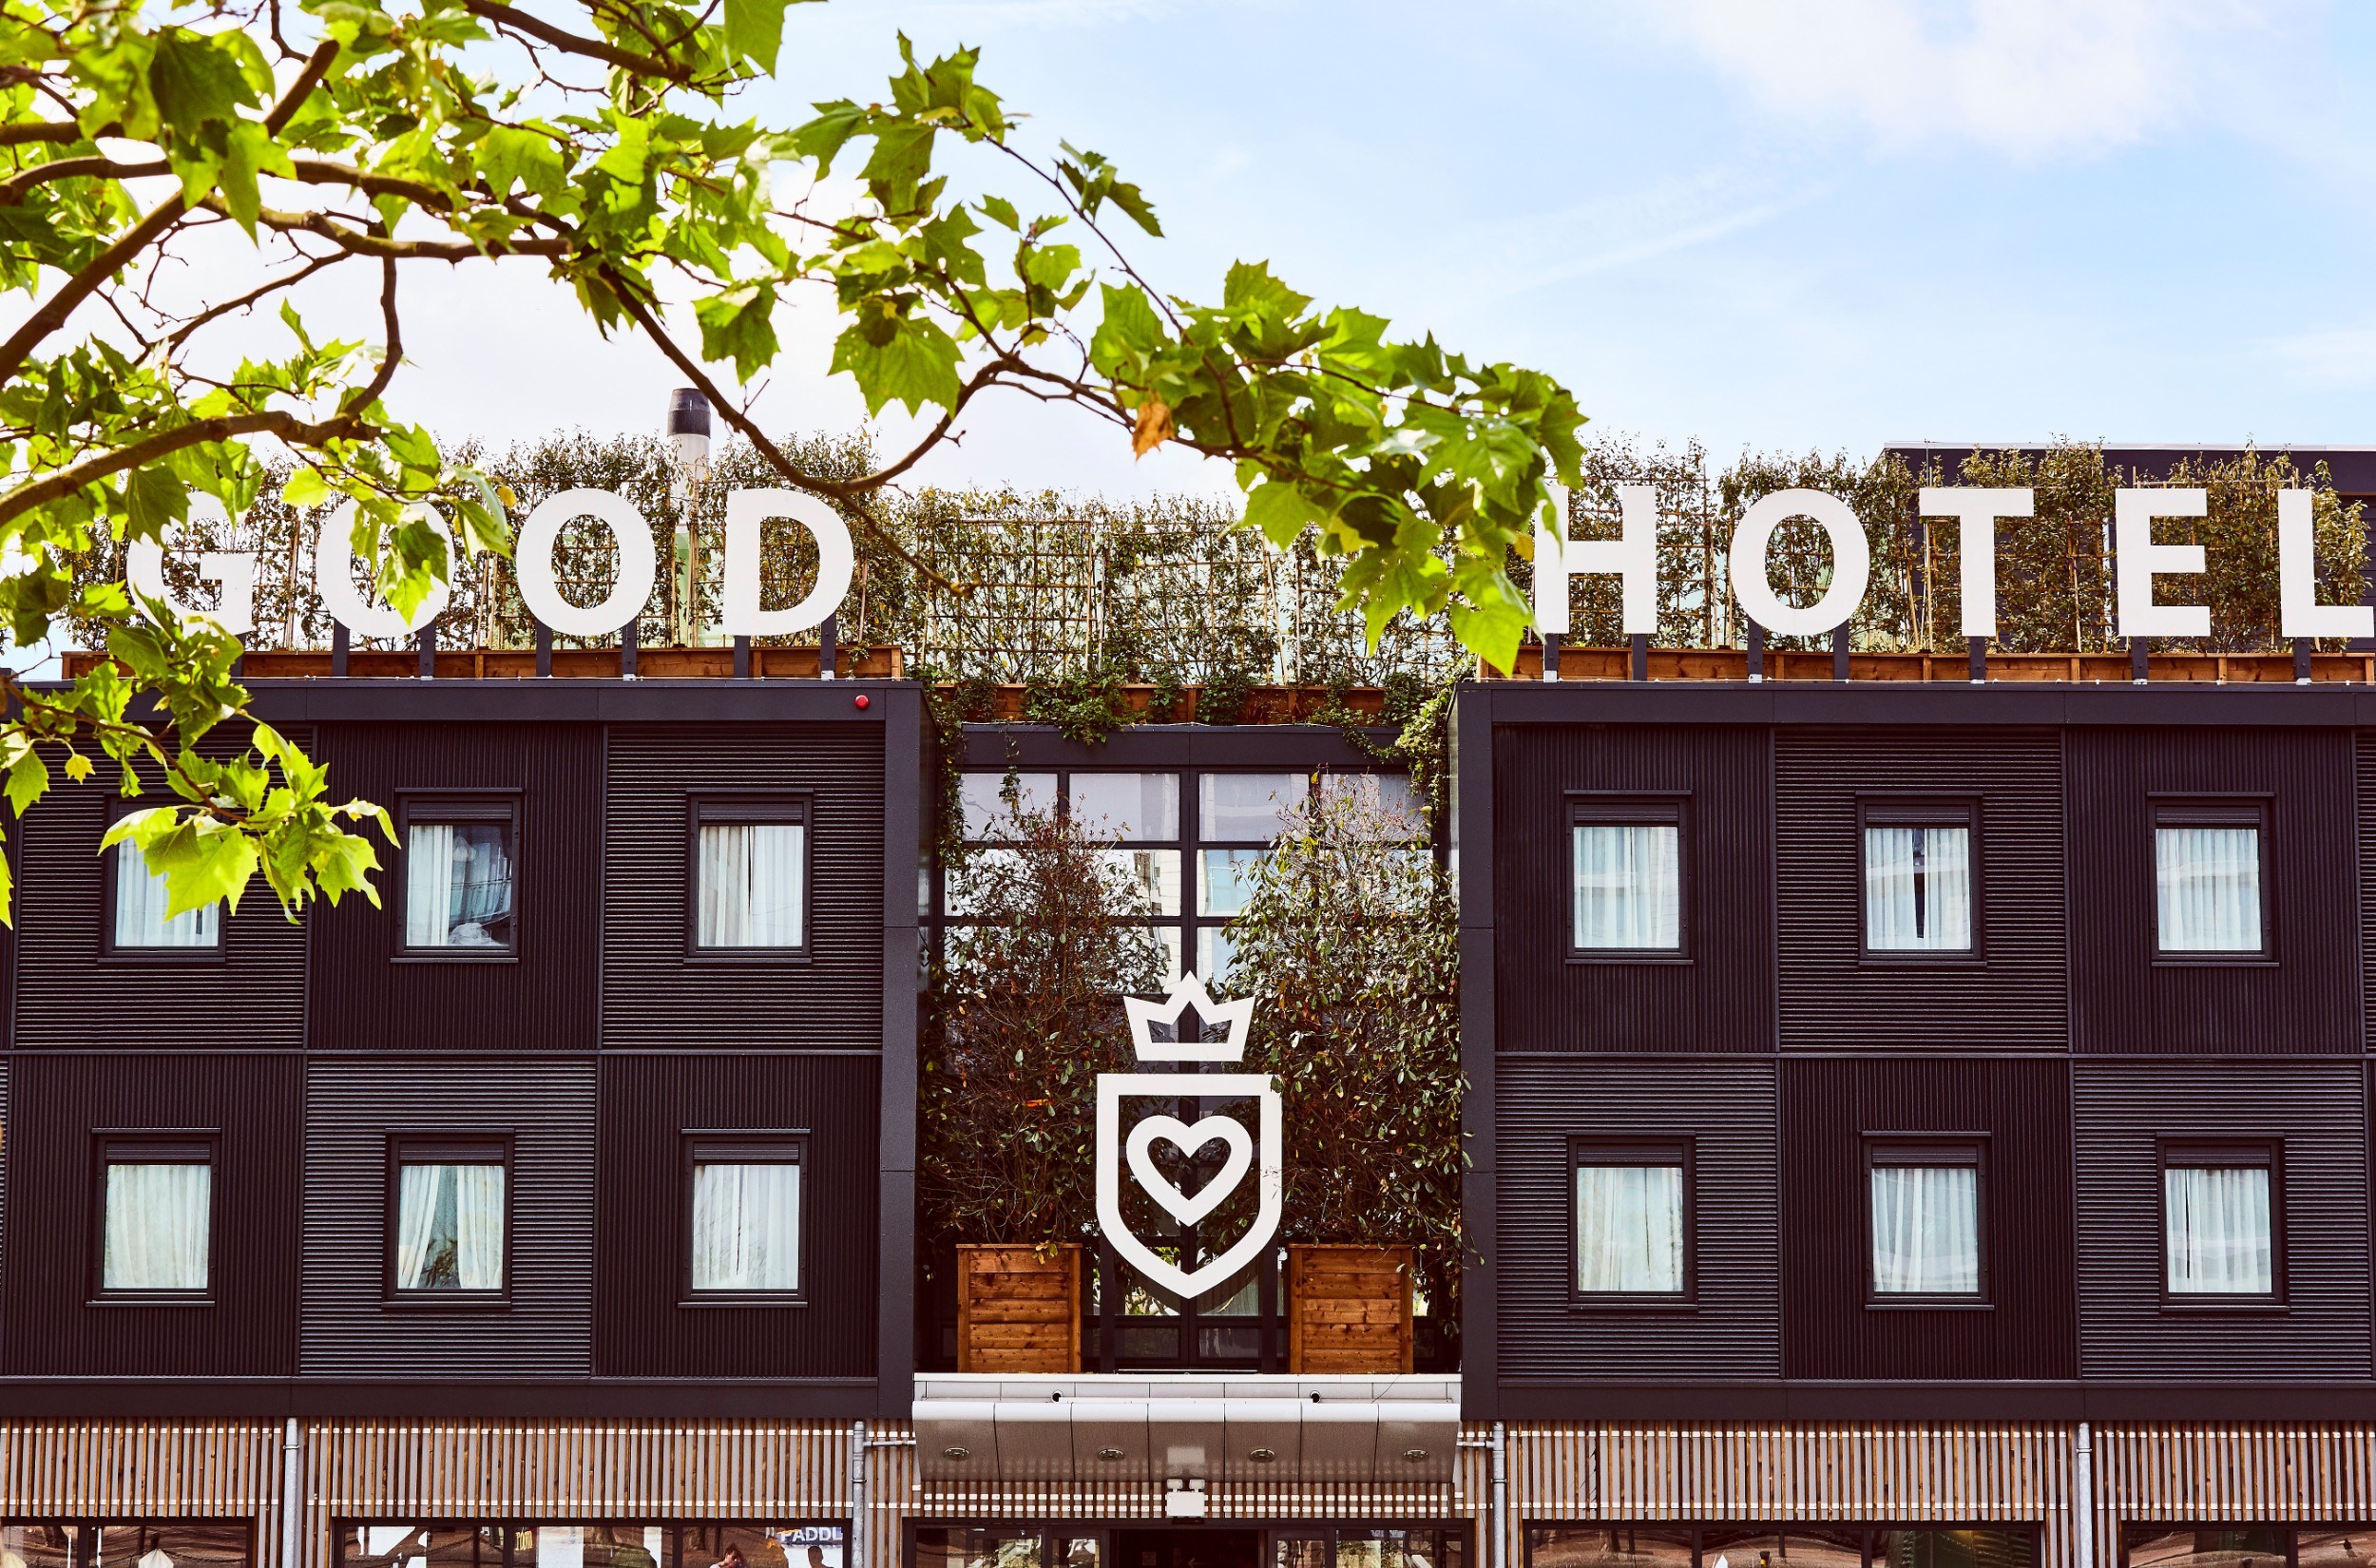 The front of the Good Hotel